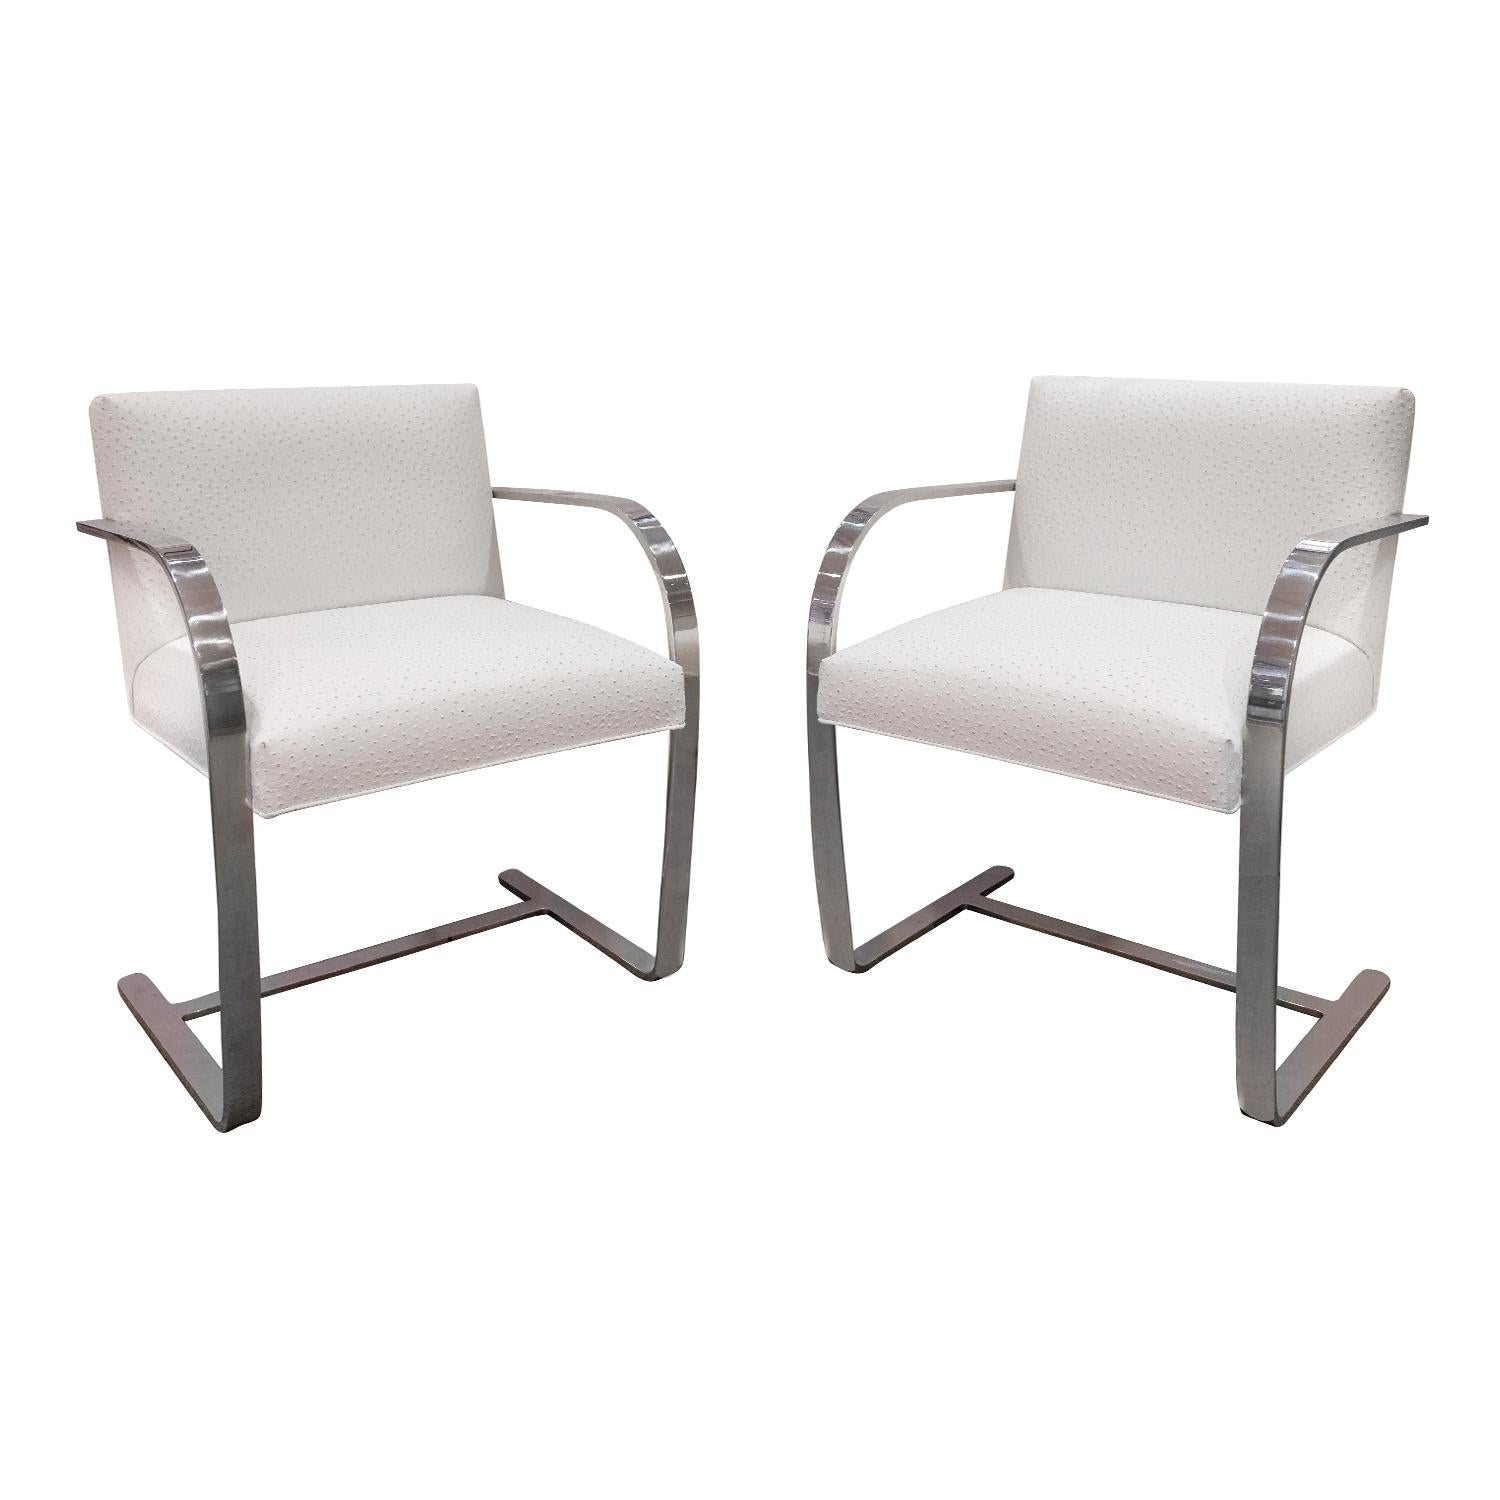 Pair of BRNO arm chairs, model 255, in polished chrome-plated flat bar steel with new white ostrich leather seats by Ludwig Mies van der Rohe for Knoll, American 1990s. These have been newly reupholstered in high quality white ostrich embossed